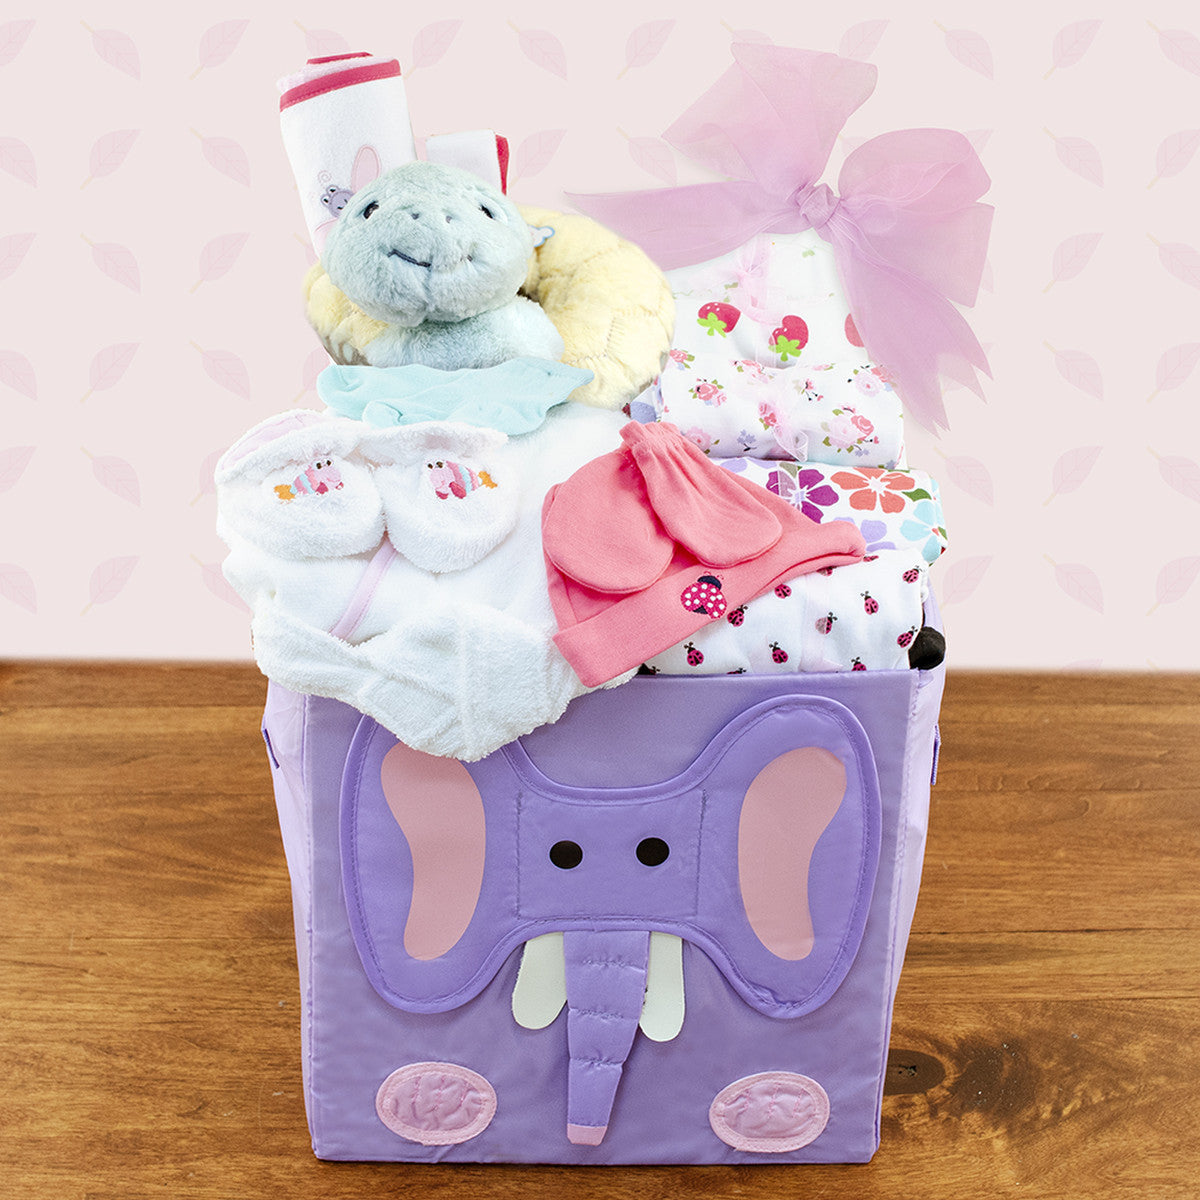 Best Wishes: Baby Girl Gift Basket